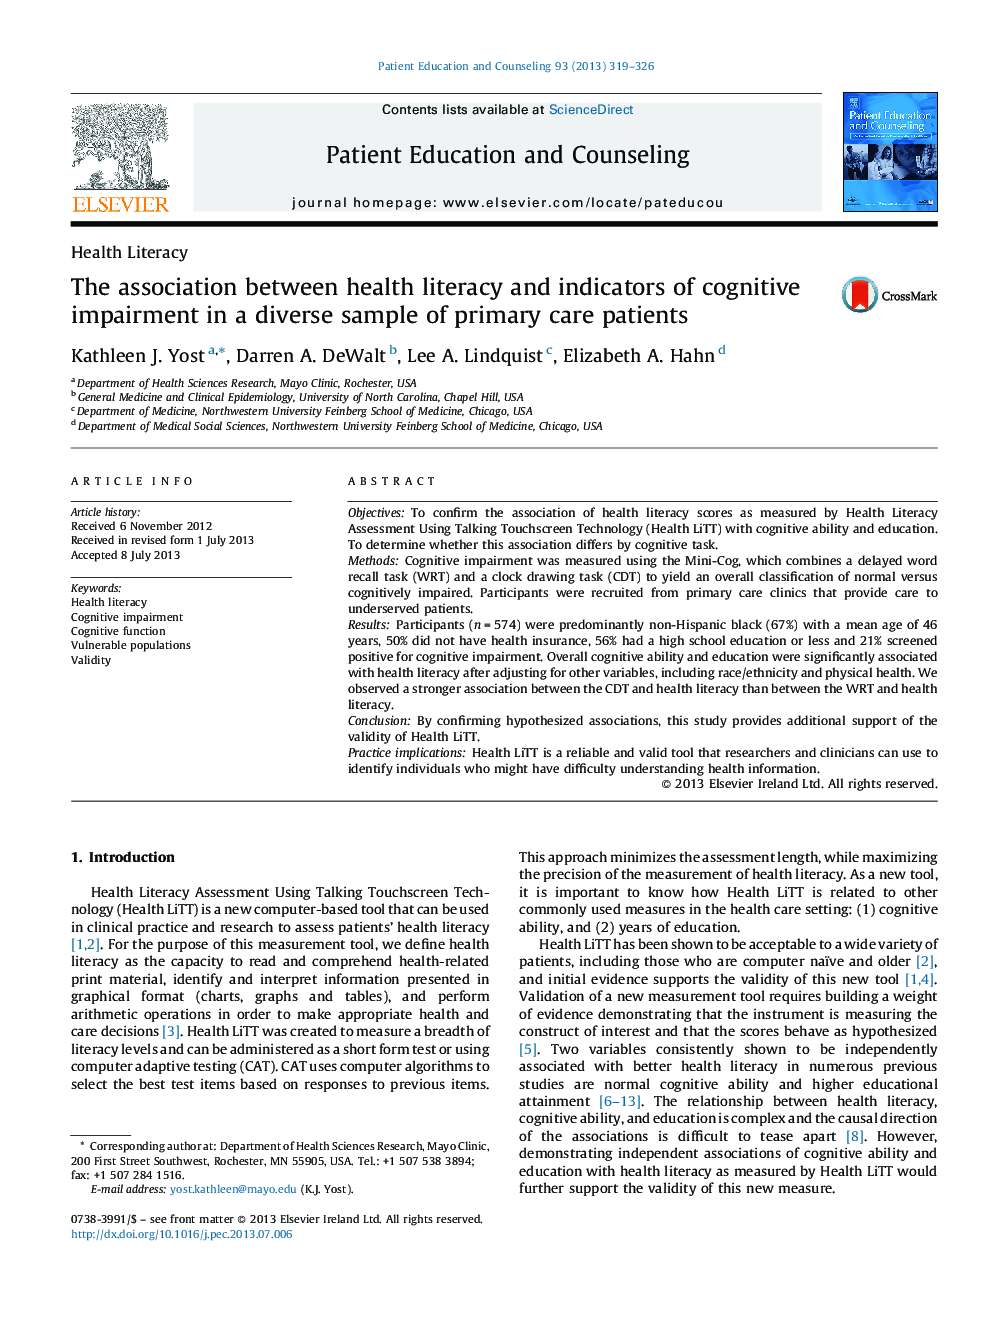 The association between health literacy and indicators of cognitive impairment in a diverse sample of primary care patients